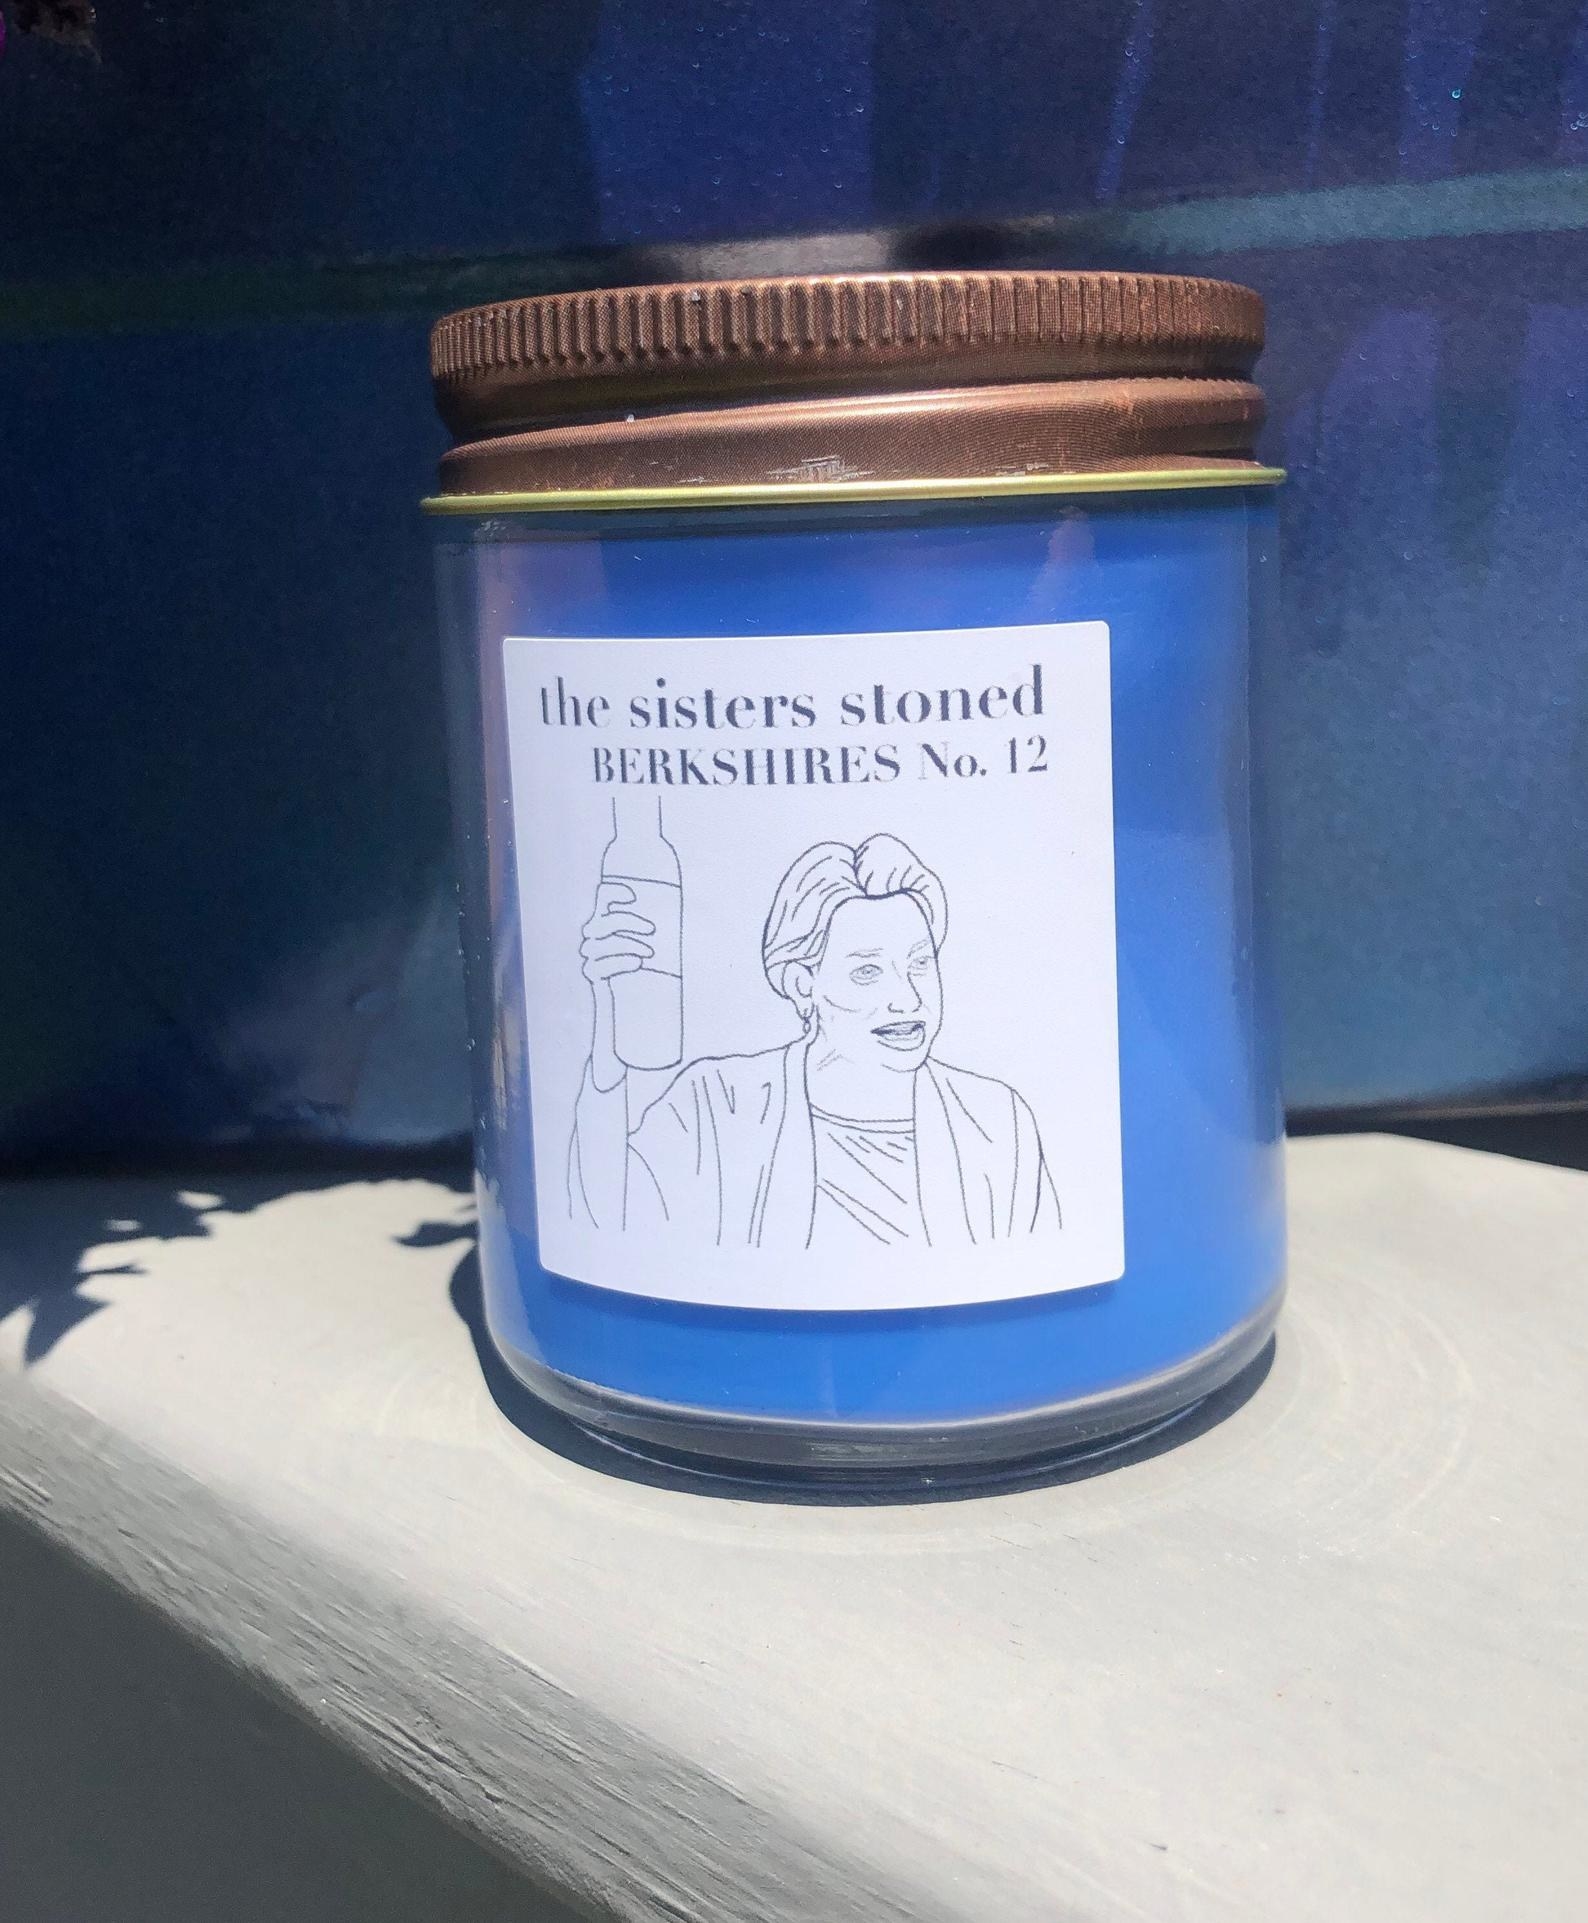 The blue candle with an illustration of Dorinda from RHONY holding a bottle of wine